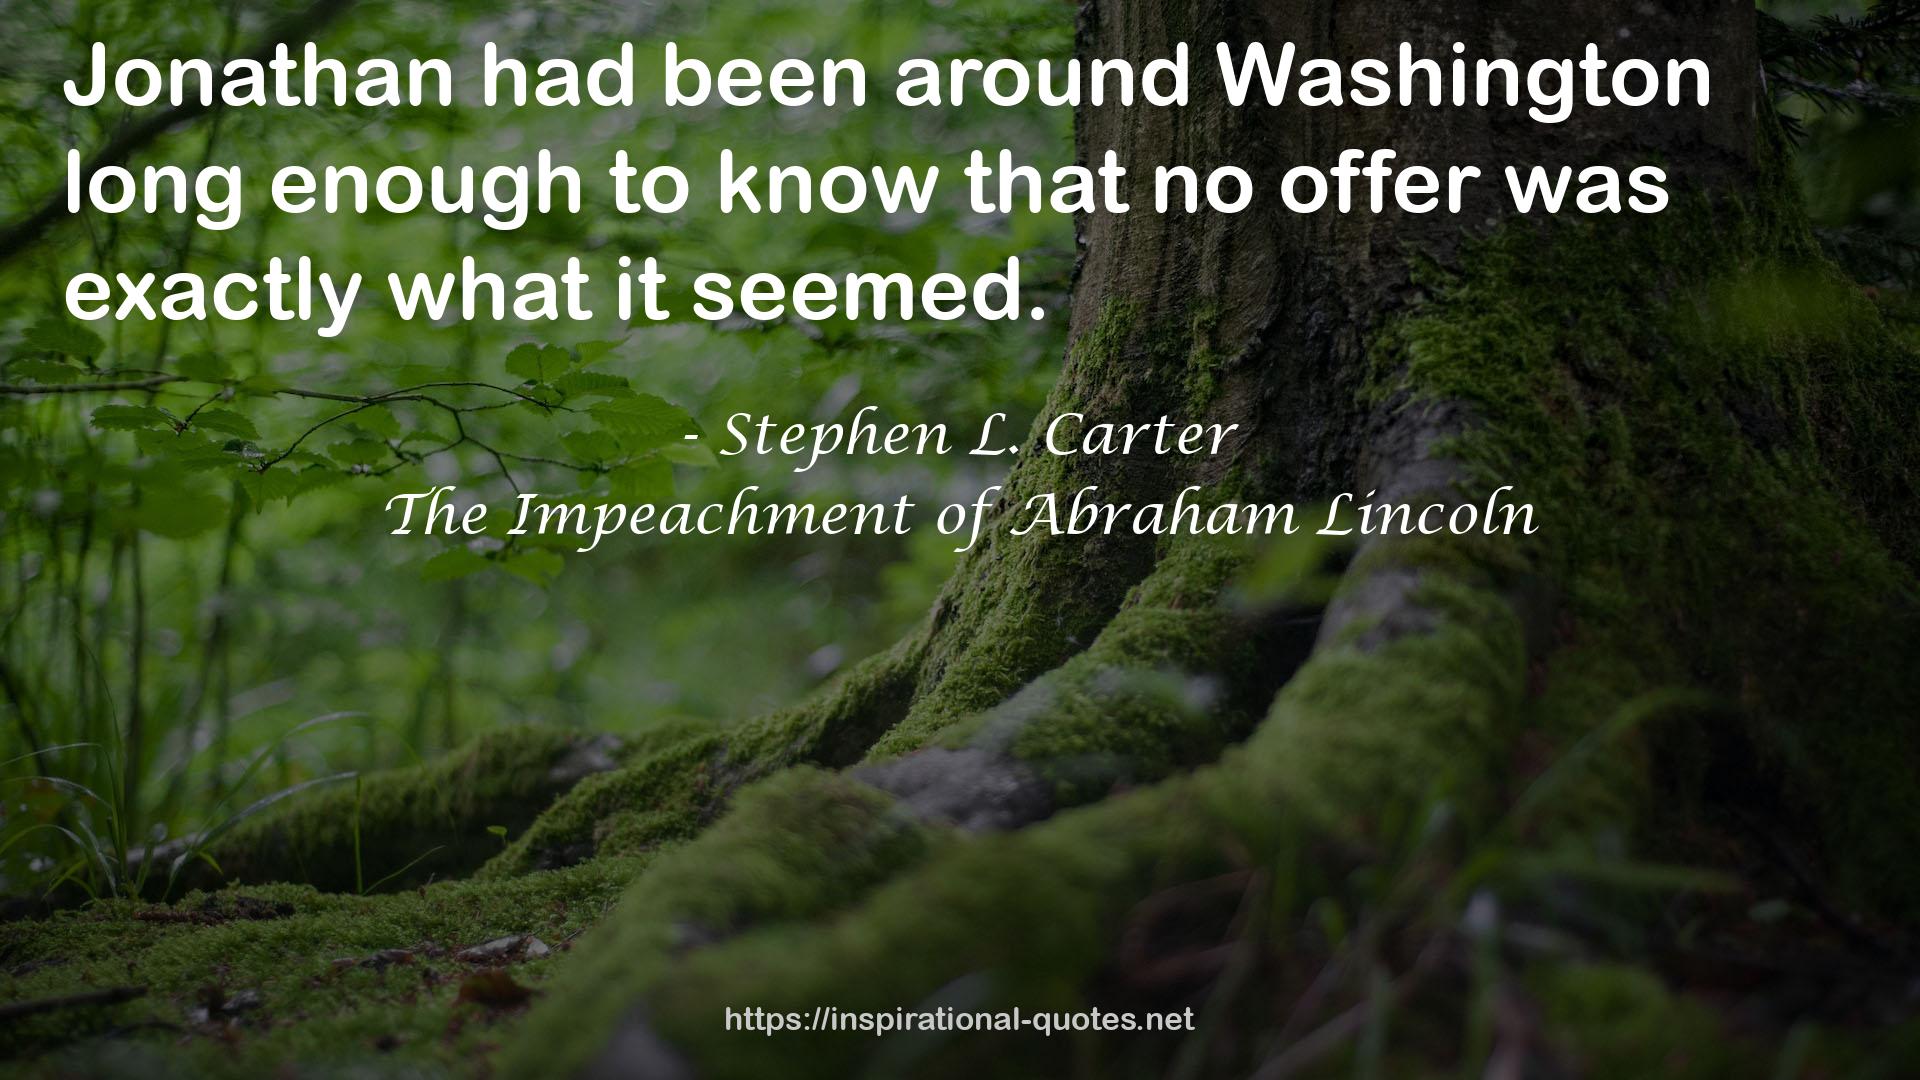 The Impeachment of Abraham Lincoln QUOTES